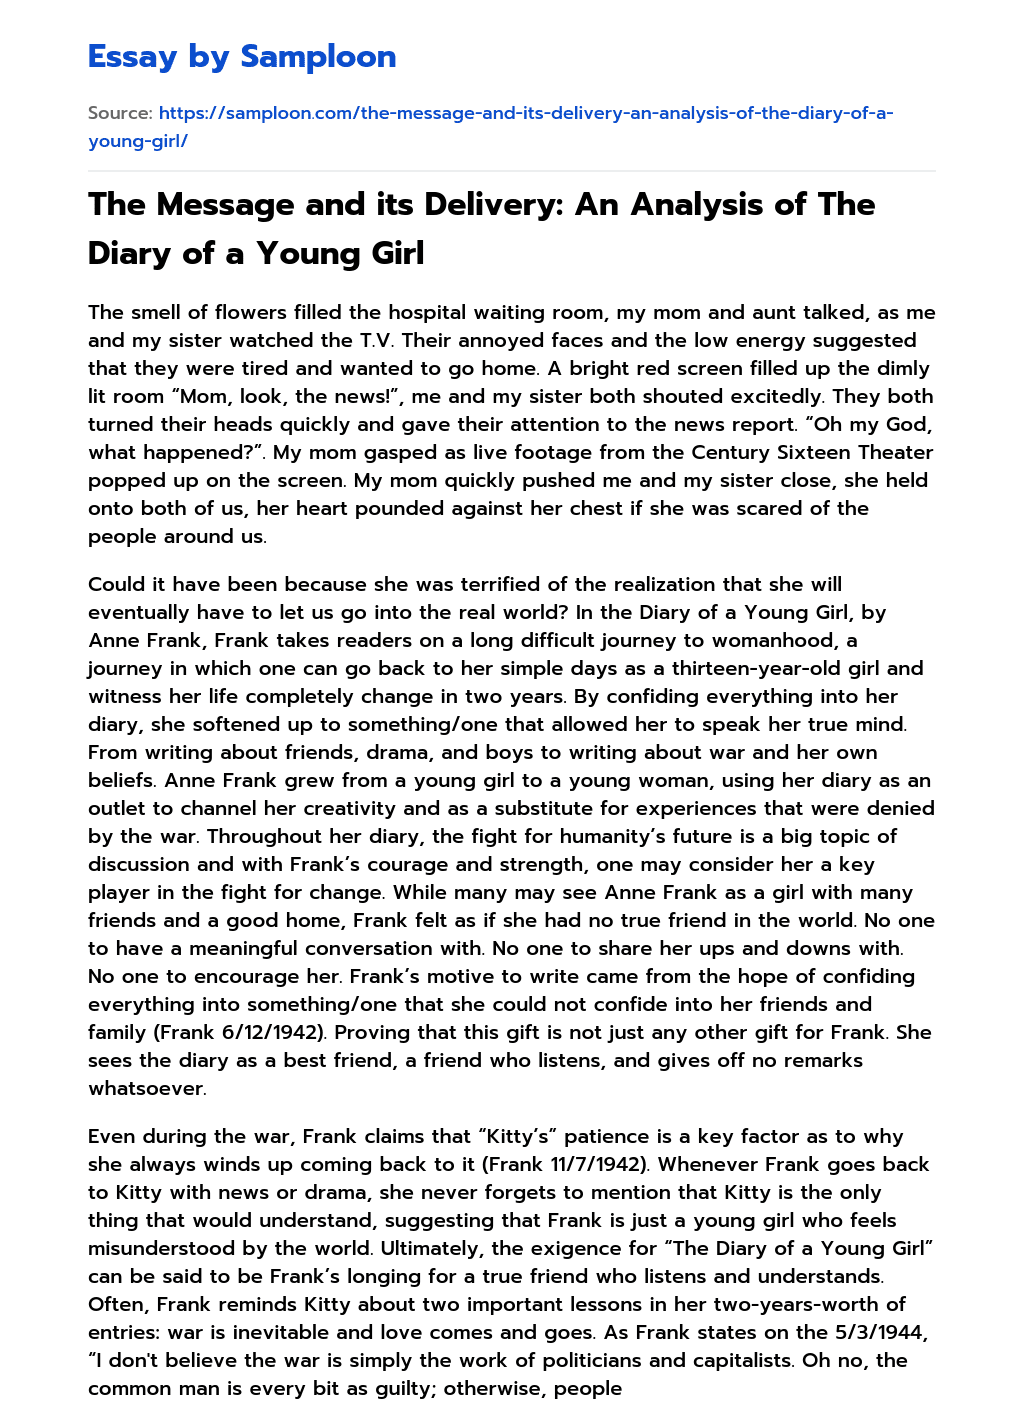 The Message and its Delivery: An Analysis of The Diary of a Young Girl essay